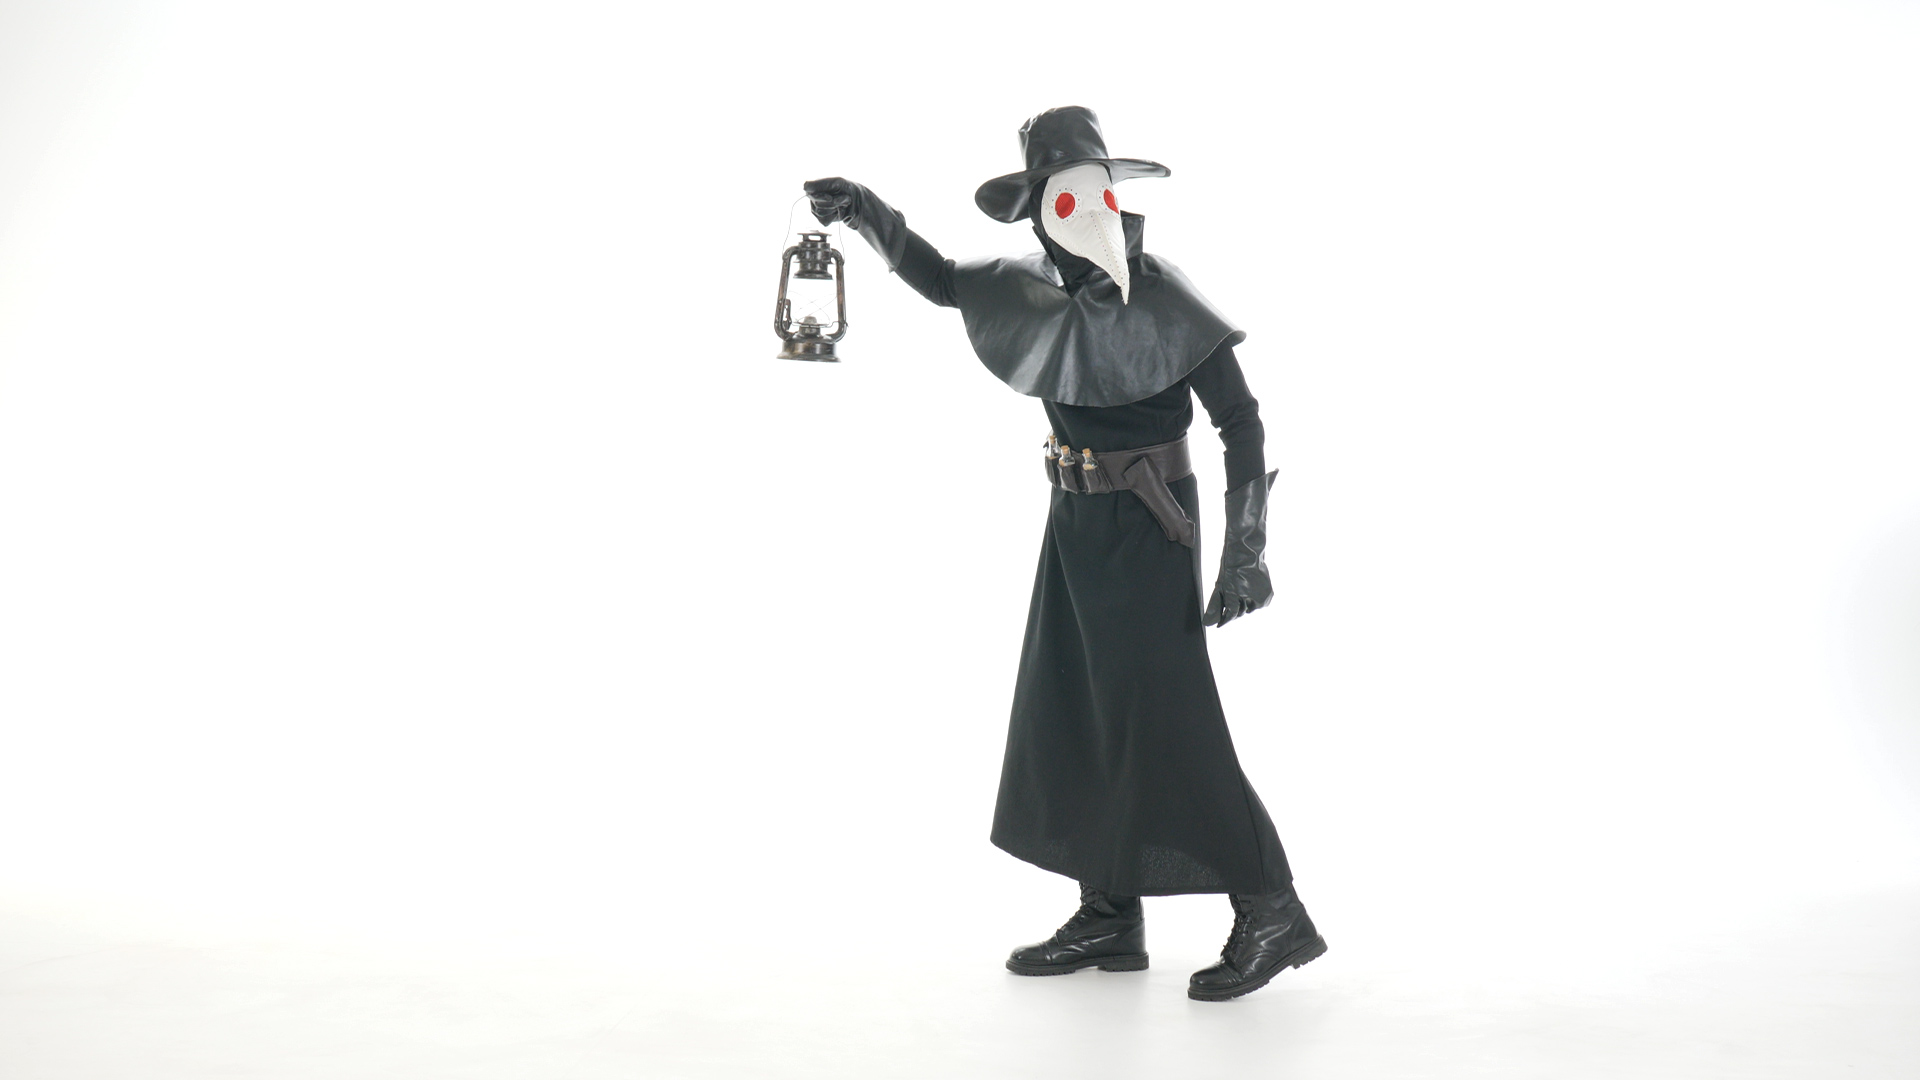 This exclusive Adult Plague Doctor Costume will transform you into a character out of a horror film!